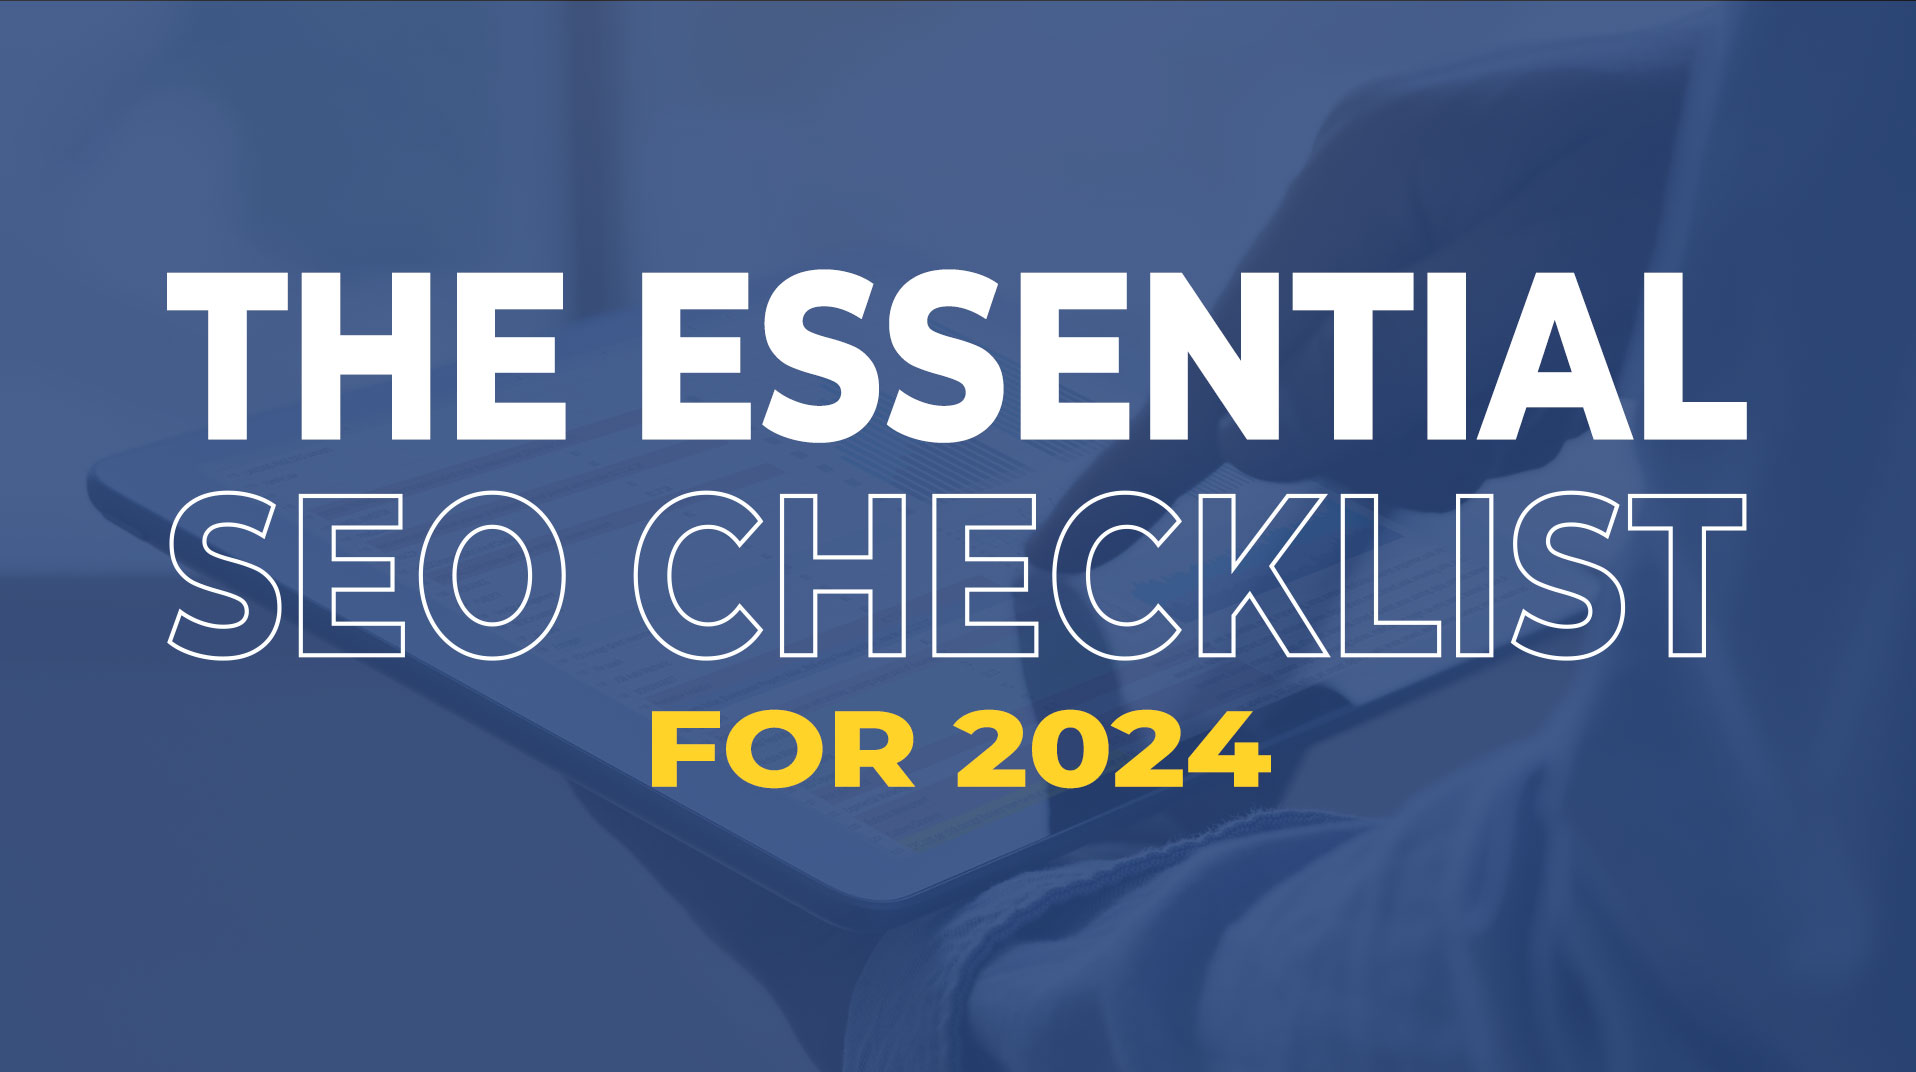 The Essential SEO Checklist for 2024